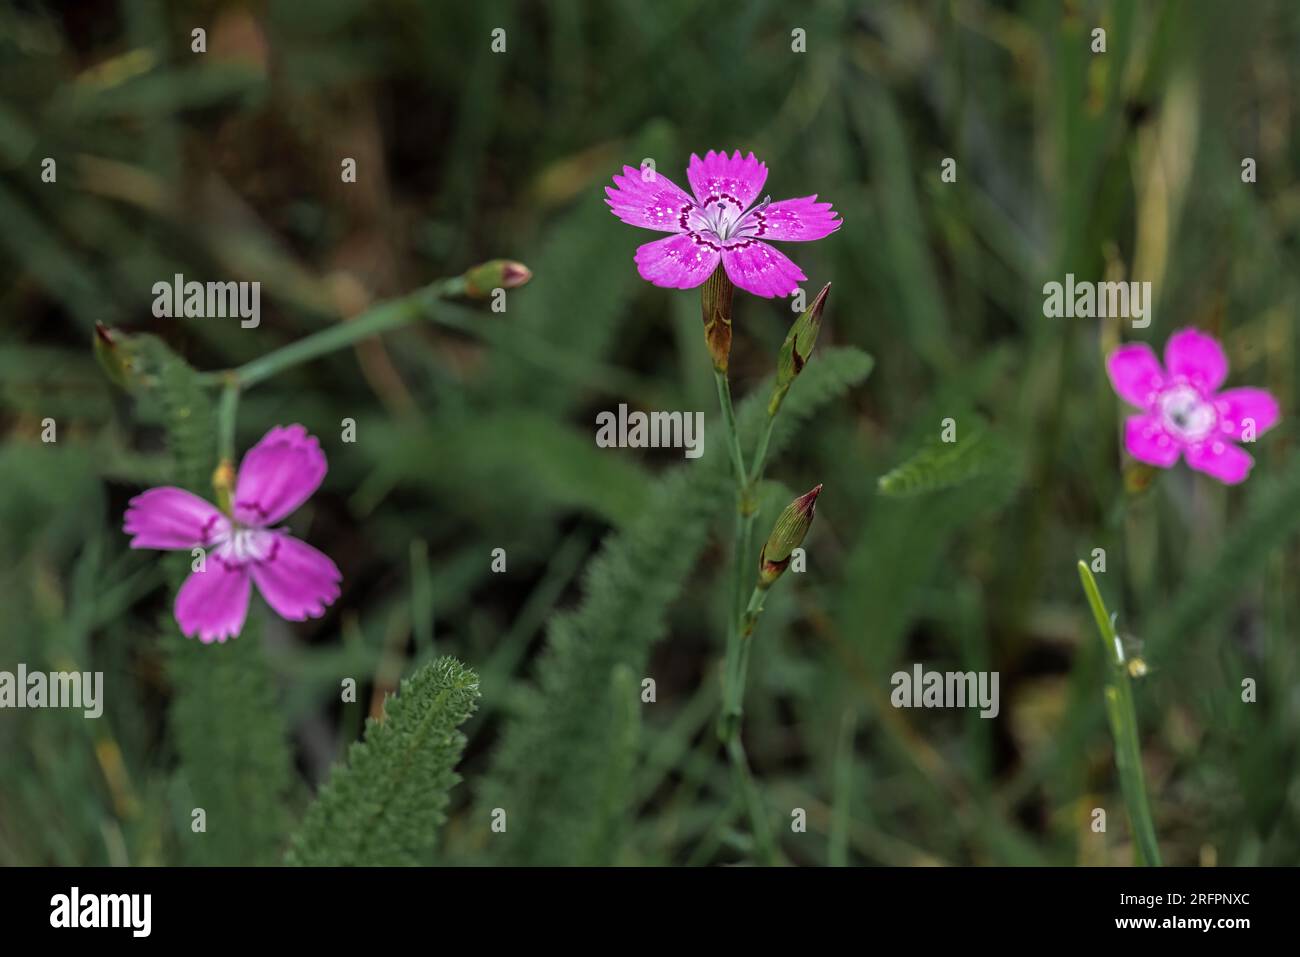 Detailed closeup on the bright purple flowers of a Carnation meadow Flower, Dianthus deltoides Stock Photo